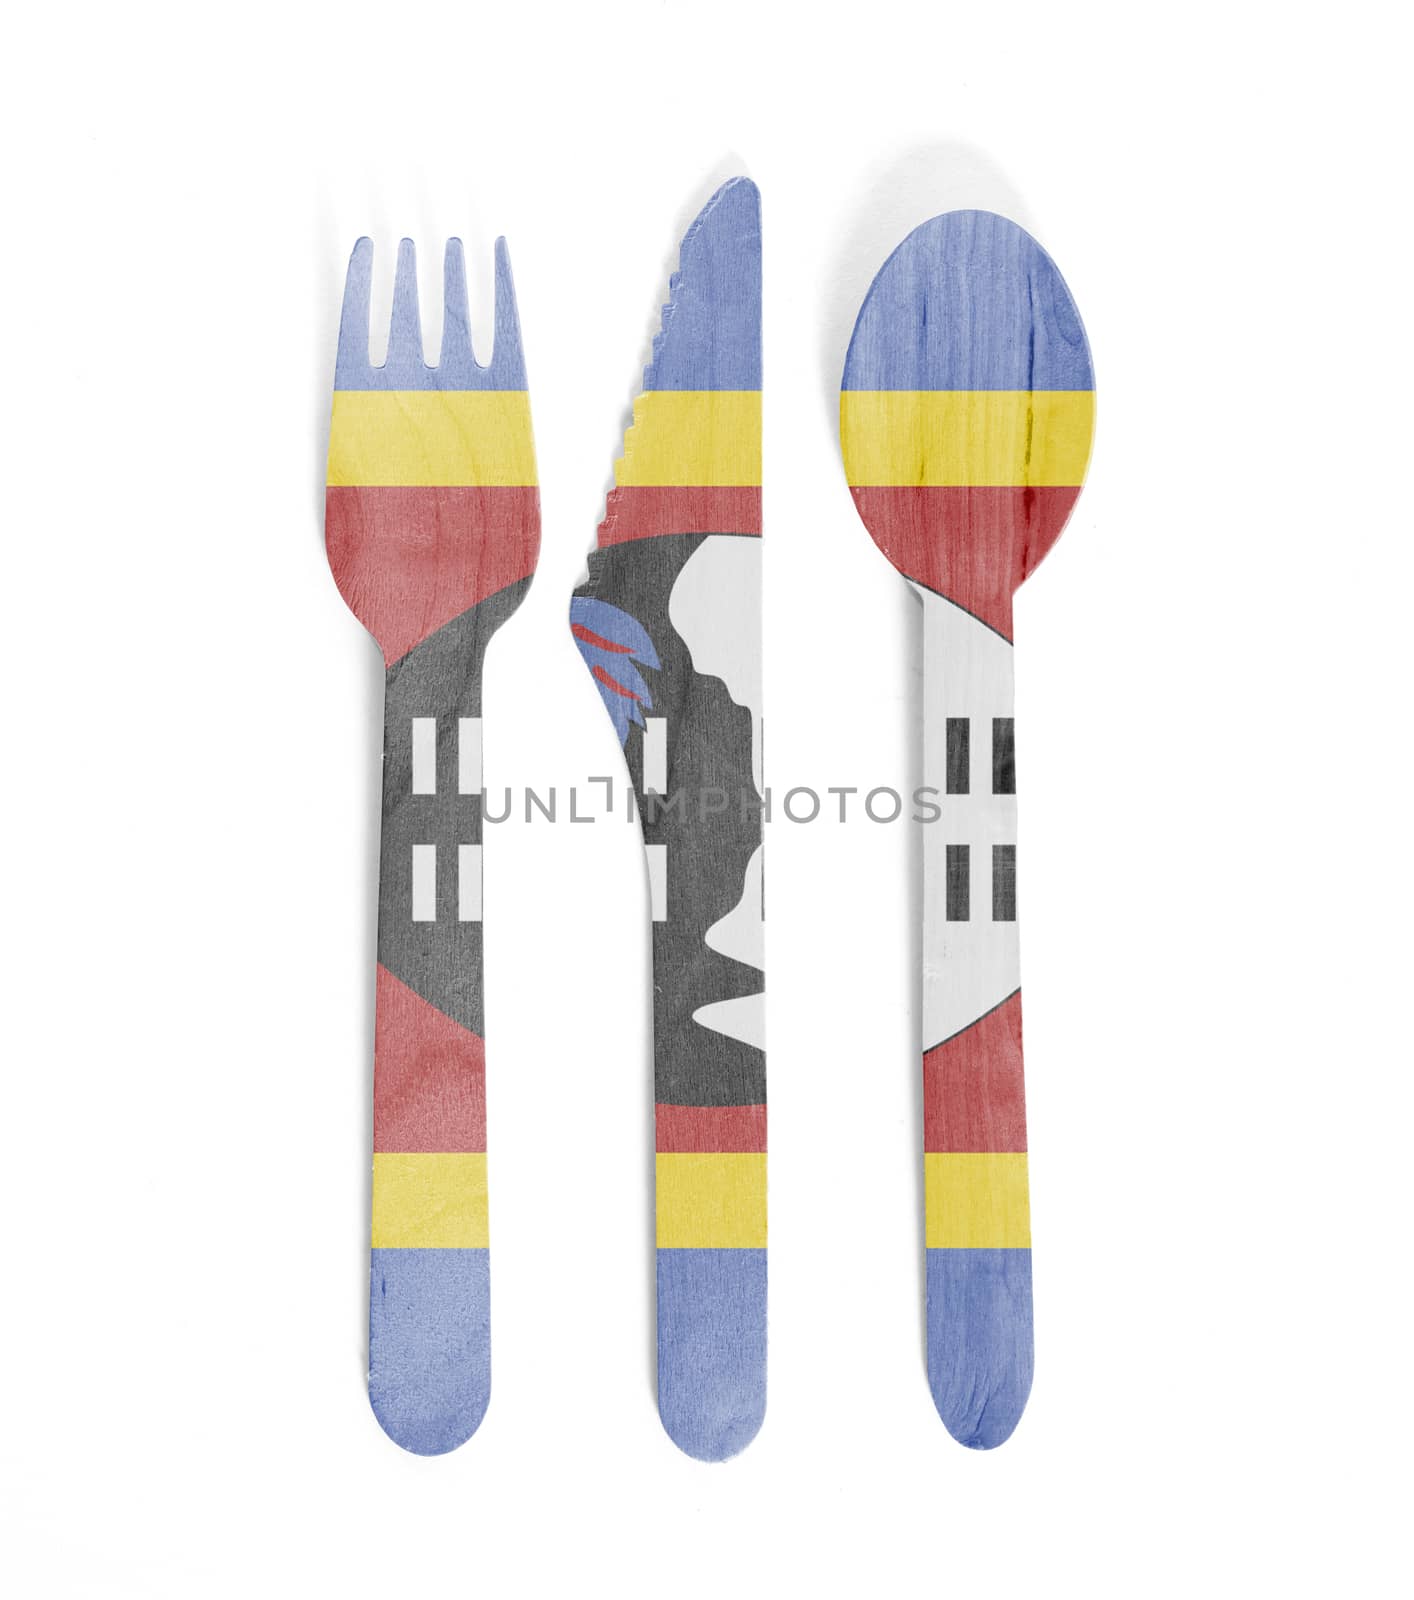 Eco friendly wooden cutlery - Plastic free concept - Flag of Swa by michaklootwijk